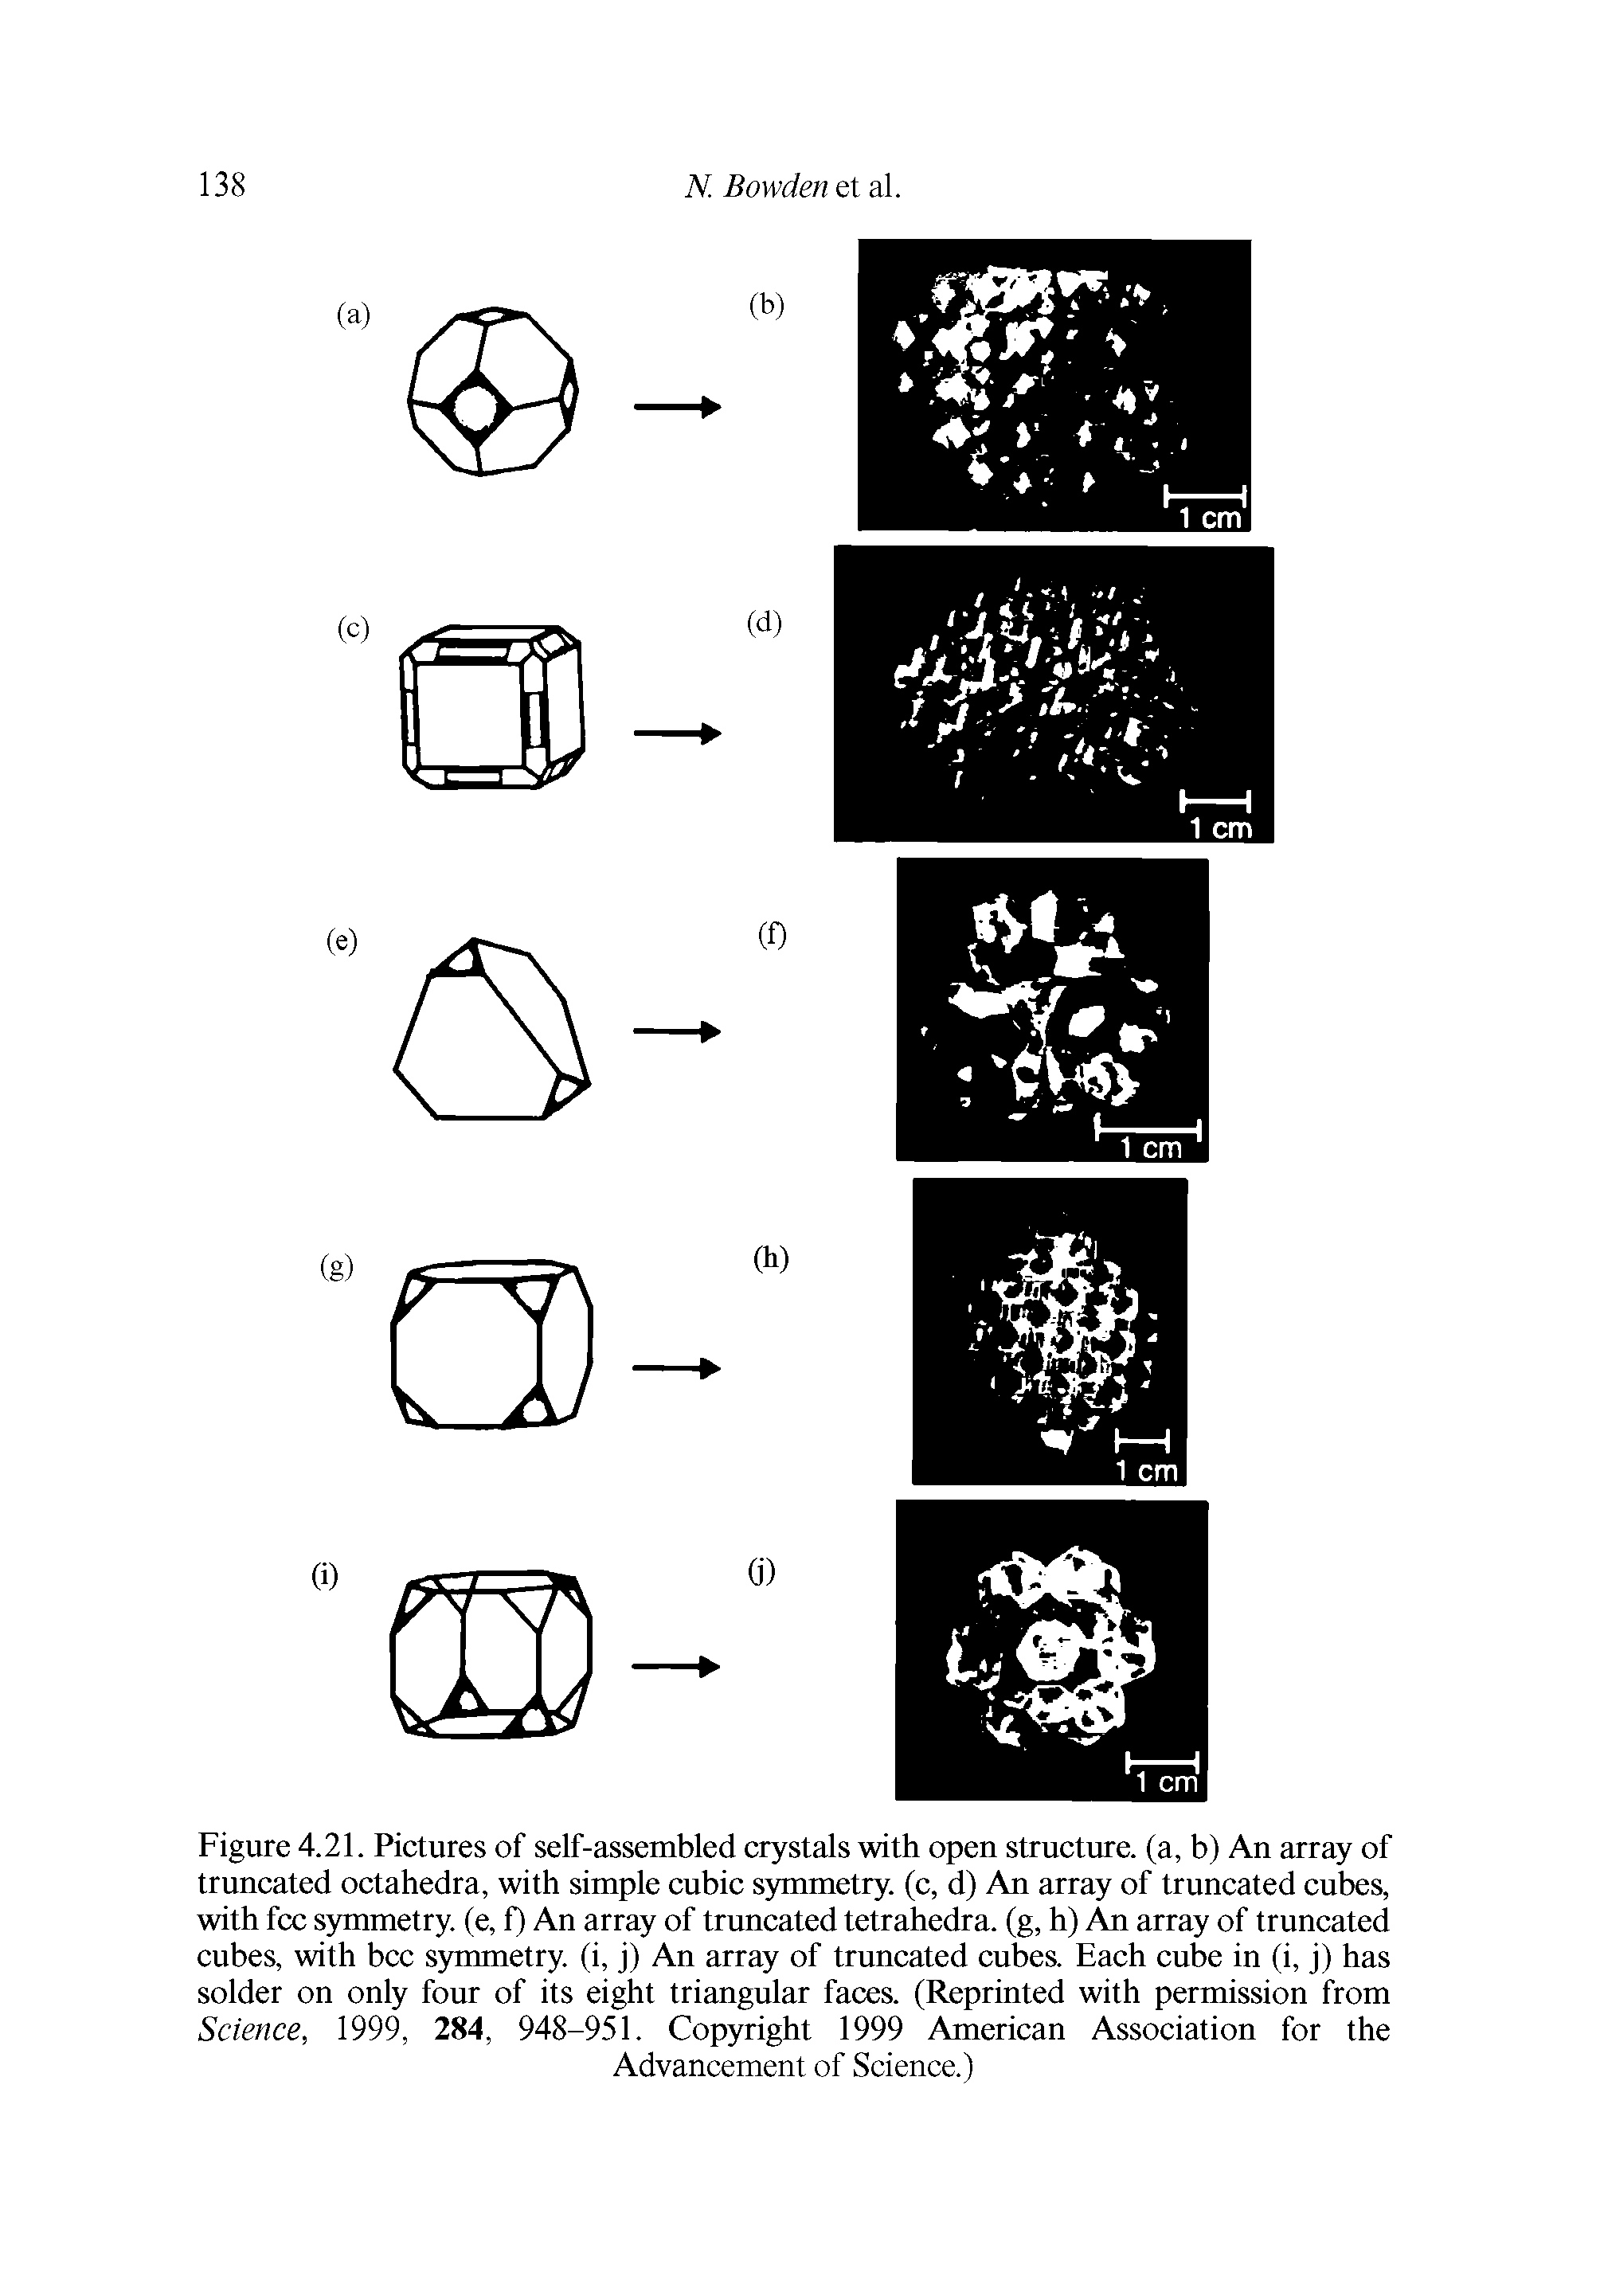 Figure 4.21. Pictures of self-assembled crystals with open structure, (a, b) An array of truncated octahedra, with simple cubic symmetry, (c, d) An array of truncated cubes, with fee symmetry, (e, f) An array of truncated tetrahedra. (g, h) An array of truncated cubes, with bcc symmetry, (i, j) An array of truncated cubes. Each cube in (i, j) has solder on only four of its eight triangular faces. (Reprinted with permission from Science, 1999, 284, 948-951. Copyright 1999 American Association for the...